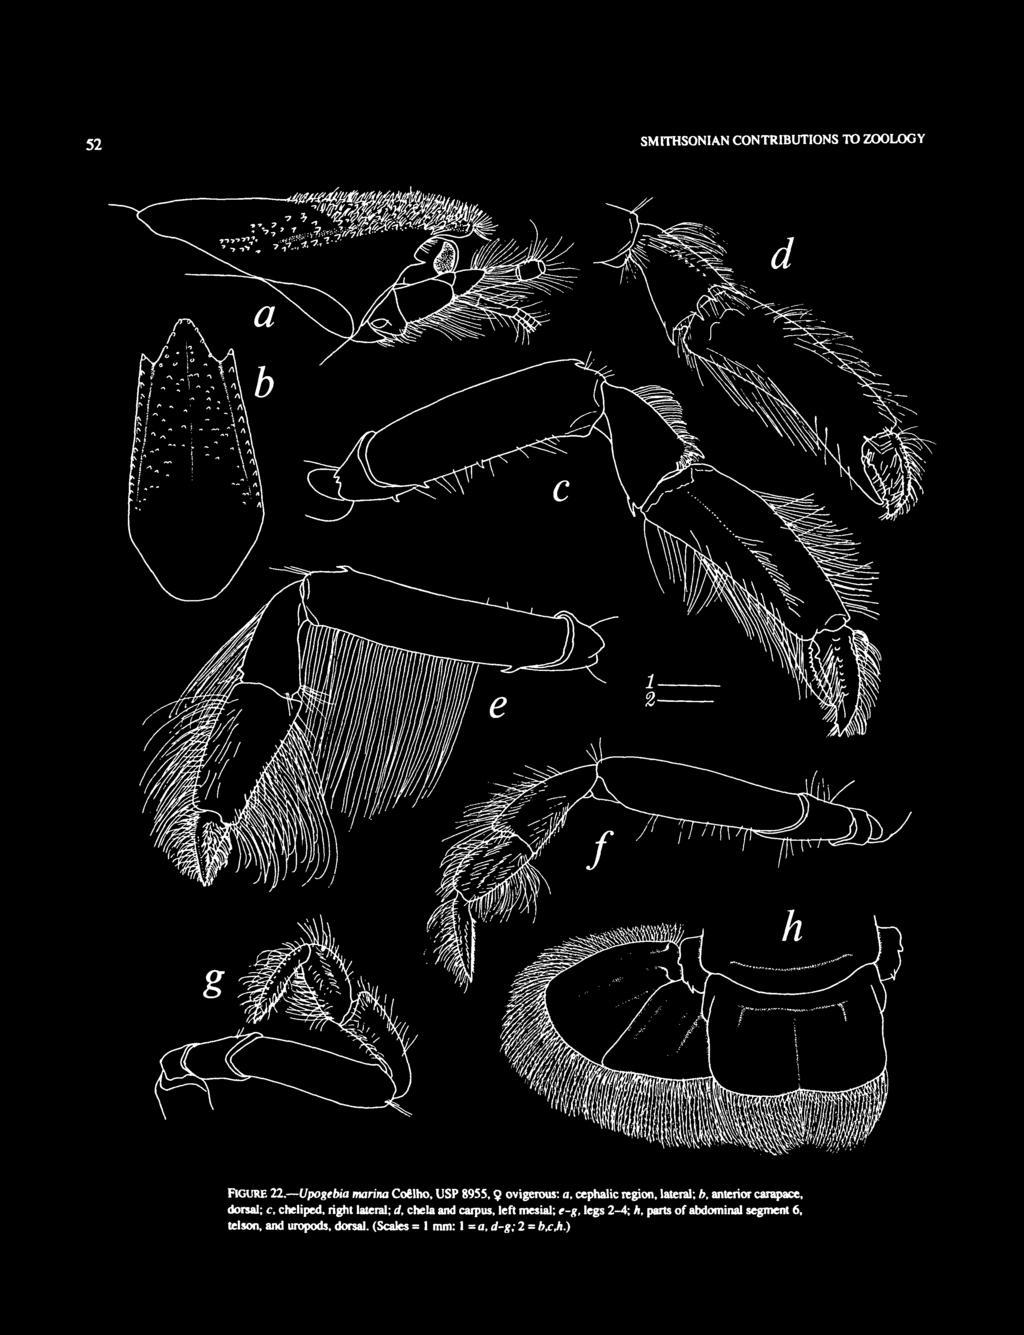 anterior carapace, dorsal; c, cheiiped, right lateral; d, chela and carpus, left